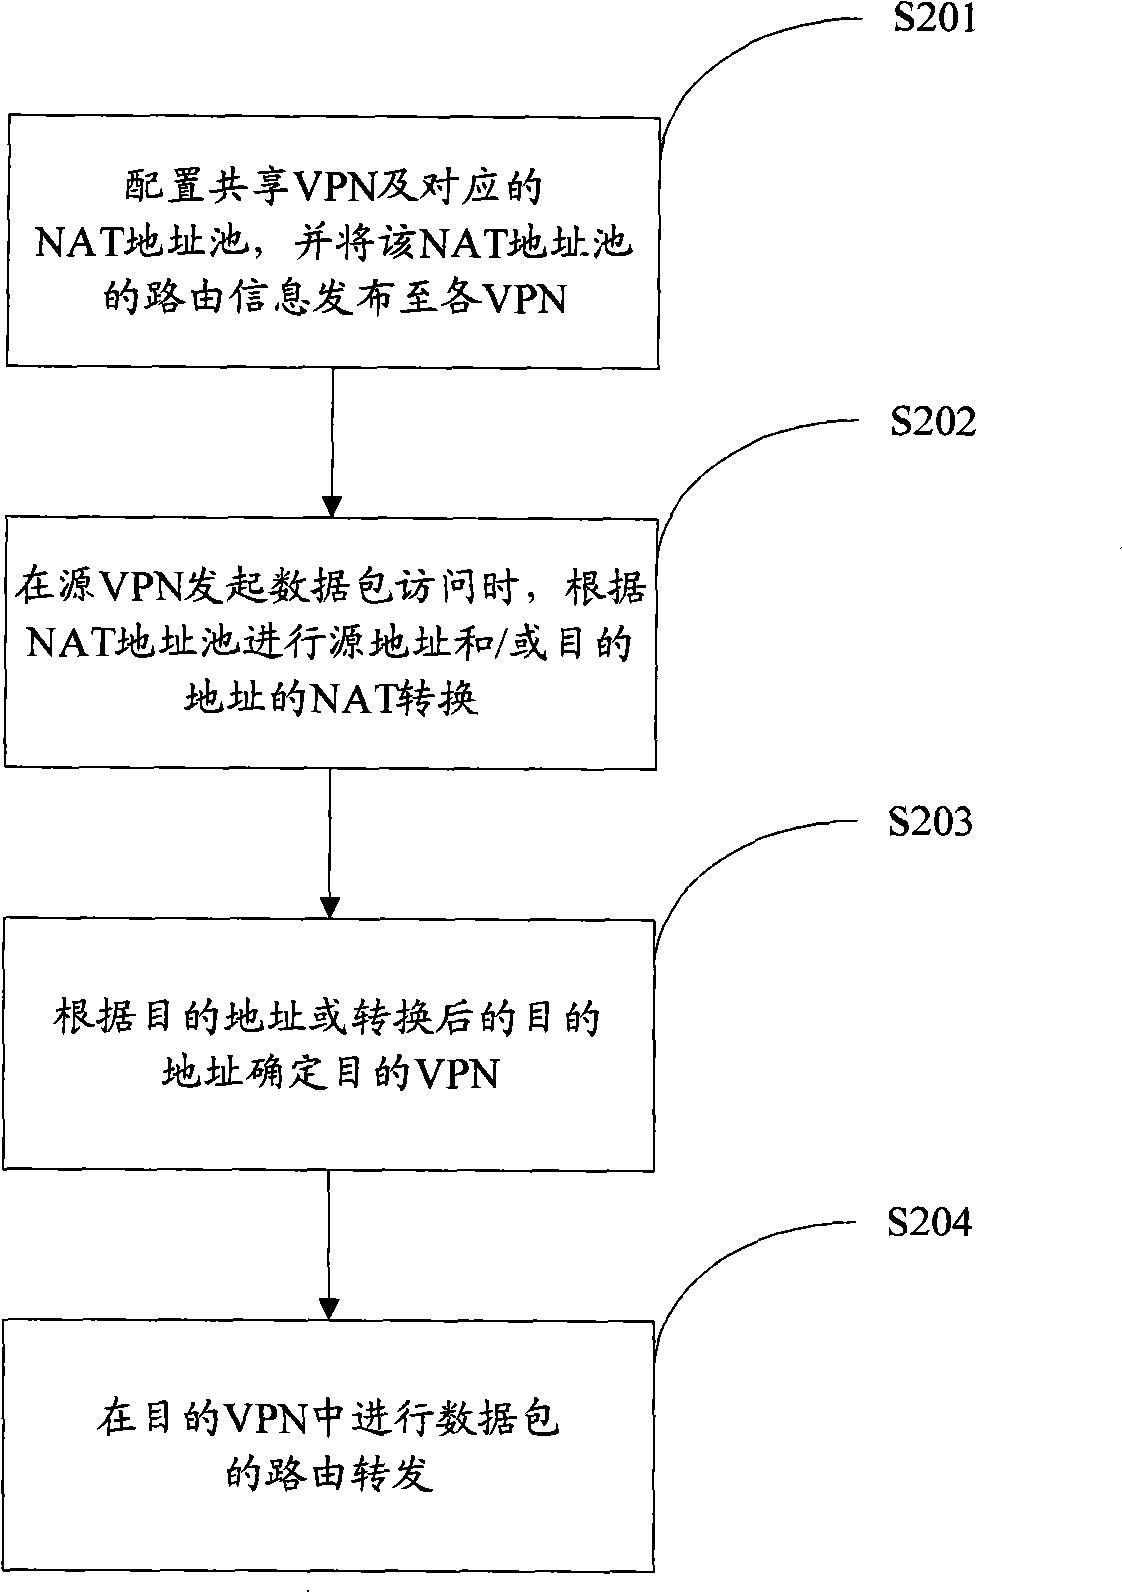 Method and device for implementing inter-access between virtual private networks by conversion of network addresses